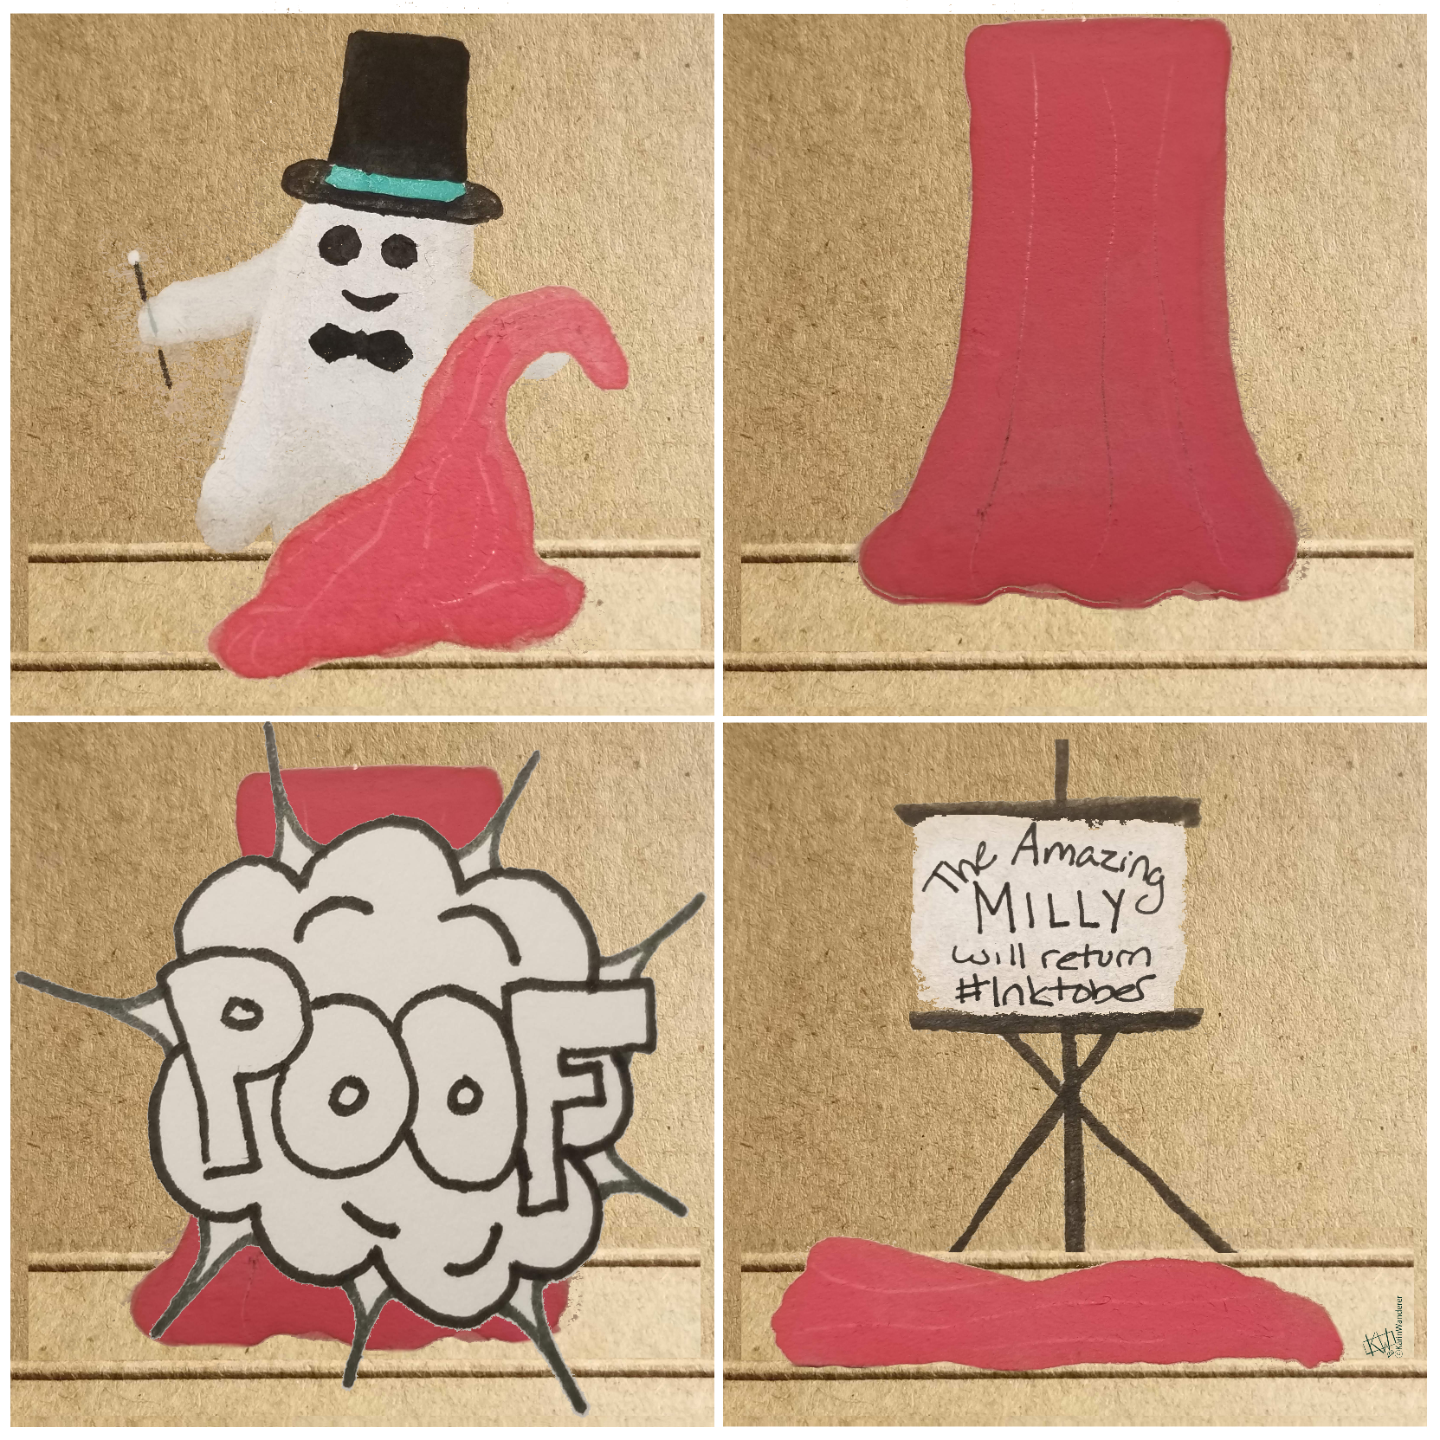 4-panel comic, watercolor & ink.
Panel 1: A smiling Milly the Ghost, in top hat & bow tie, holds a magic wand in one hand & a curtain in the other.
Panel 2: The curtain is raised to hide Milly.
Panel 3: The curtain is covered by a cloud of smoke that says "POOF".
Panel 4: The curtain falls to the ground, revealing a sign which reads "The Amazing Milly will return, #Inktober".